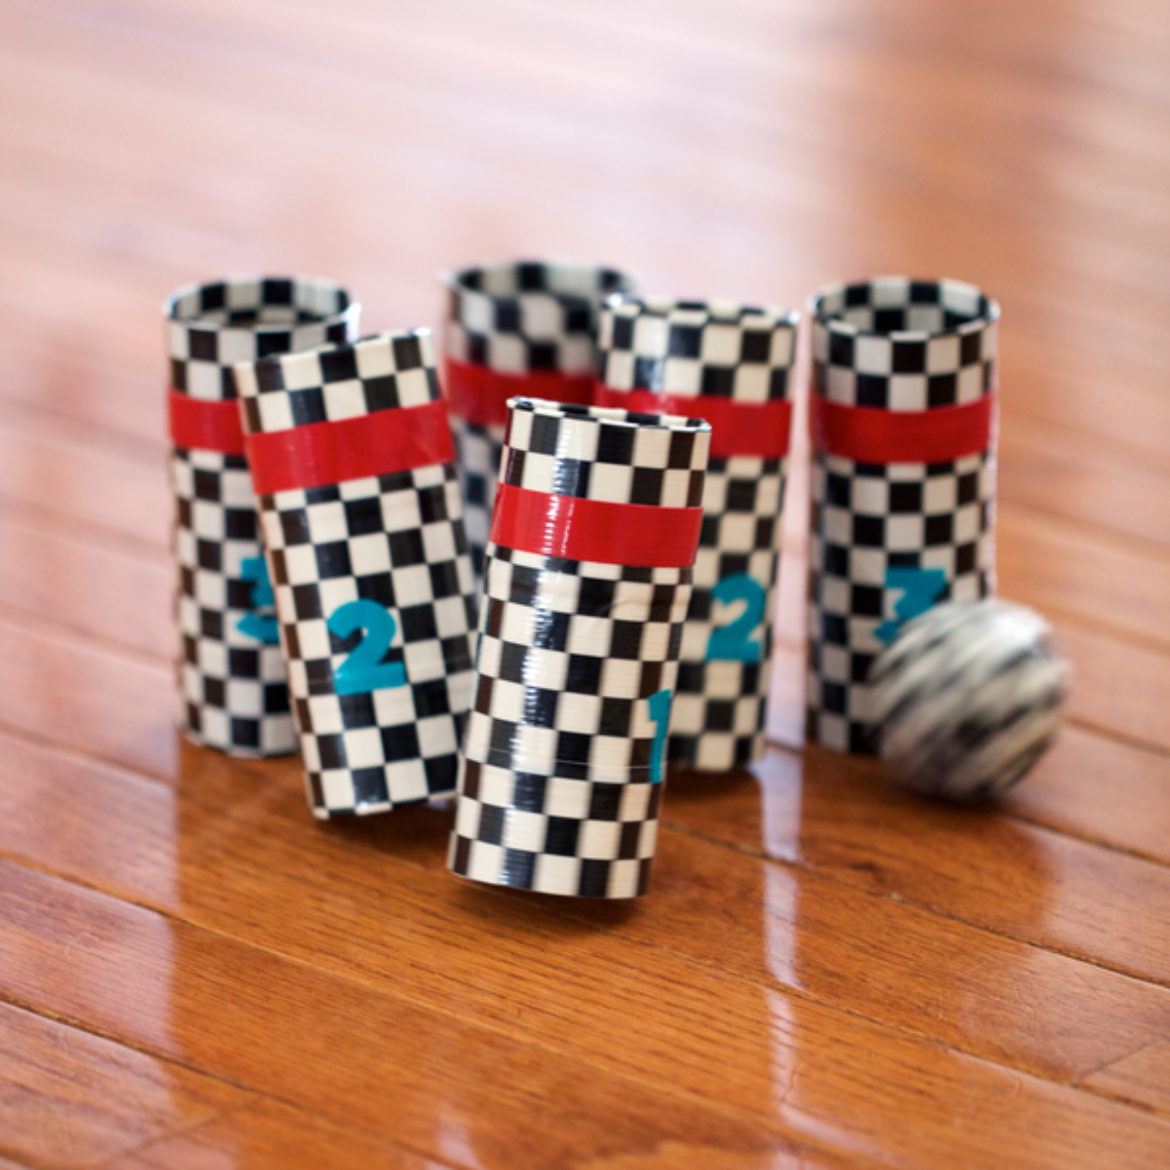 Duck Tape bowling game in use